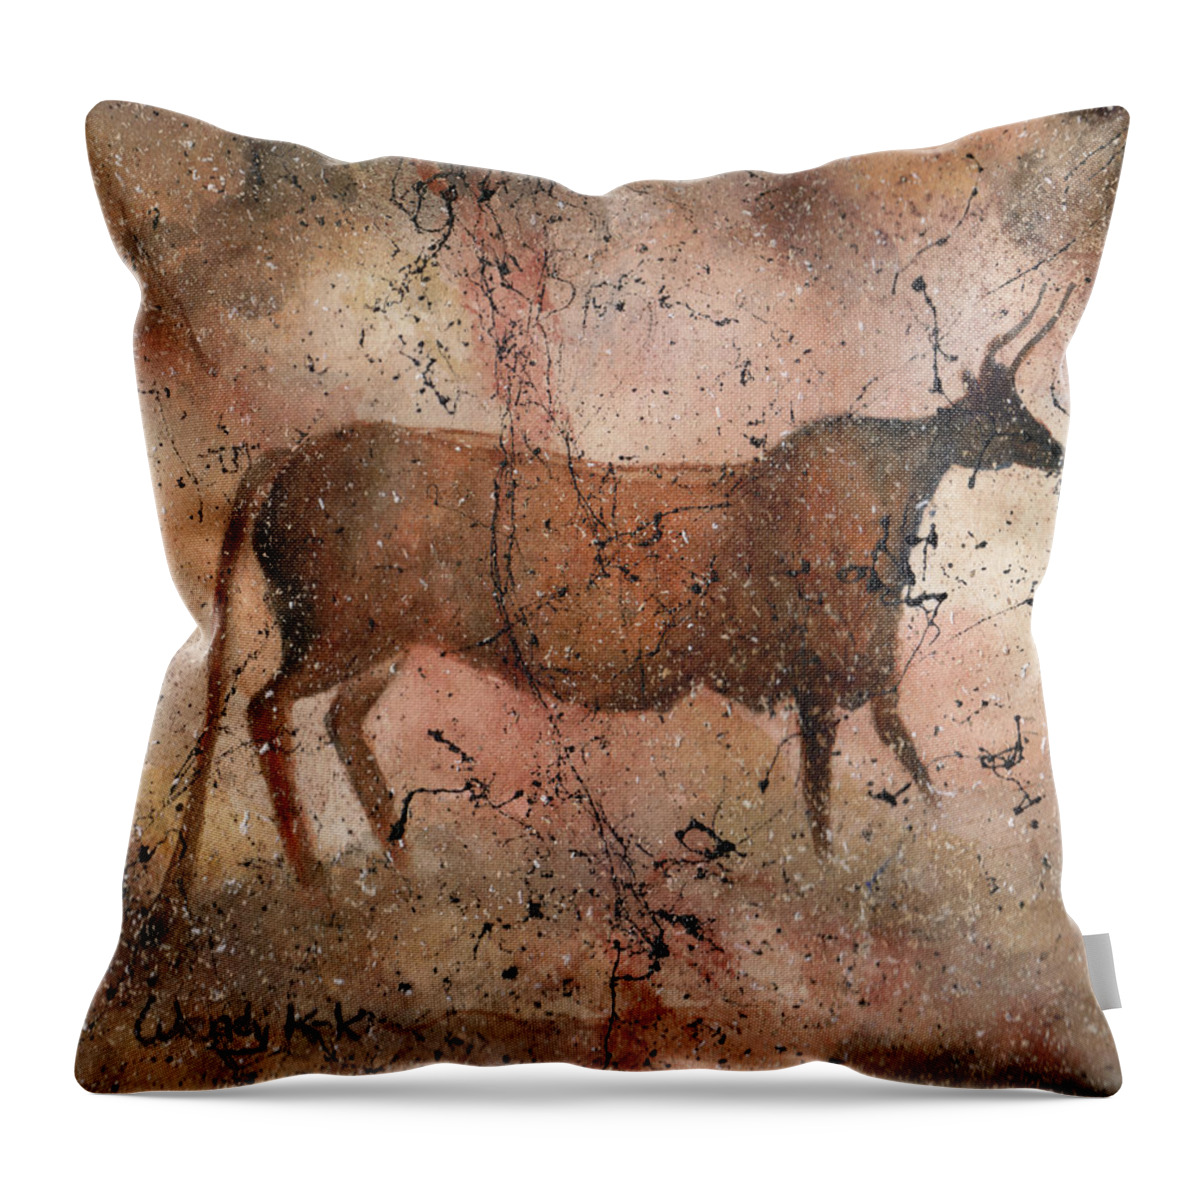 Cave Painting Throw Pillow featuring the painting Red Cow At Lascaux Cave by Wendy Keeney-Kennicutt